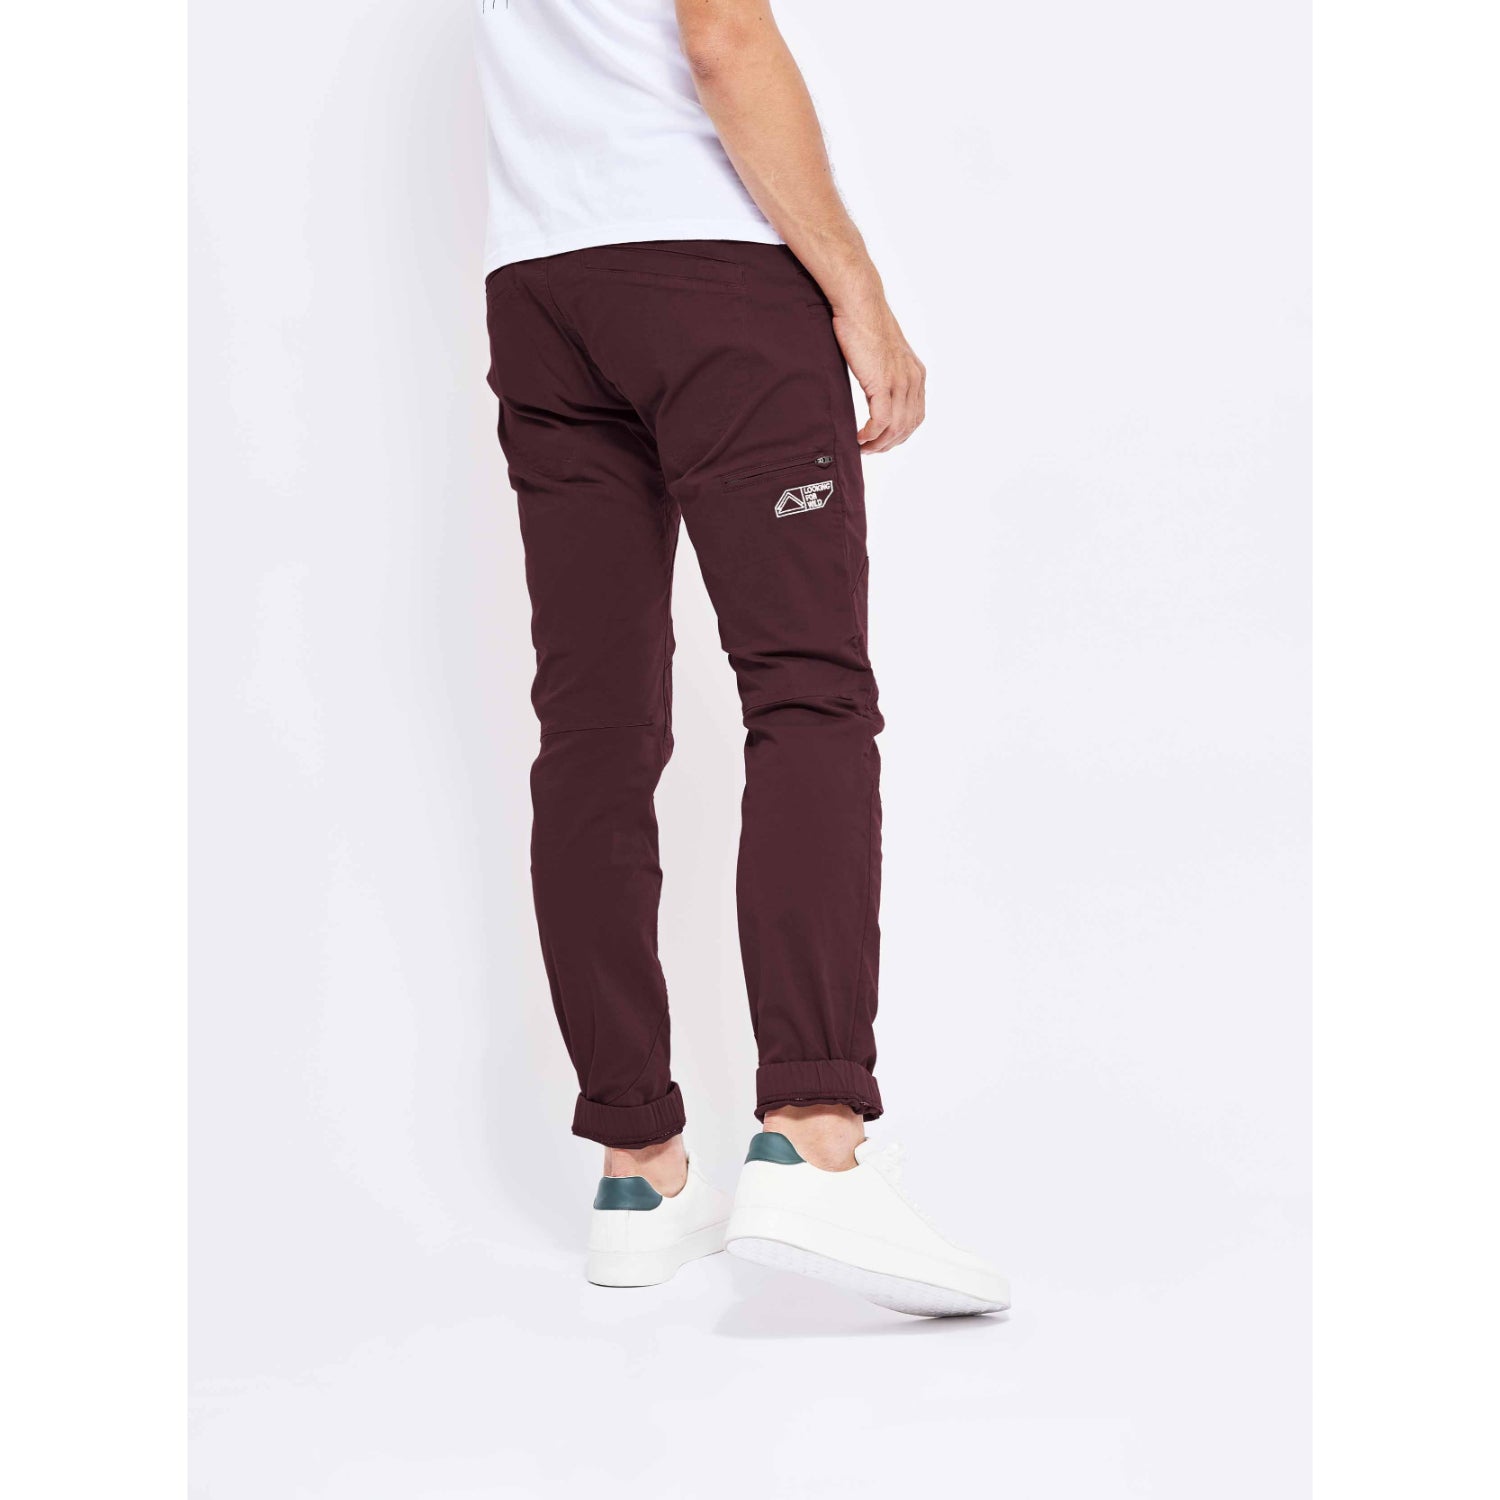 Looking For Wild Fitz Roy Pant - Mens (Raisin Rouge)